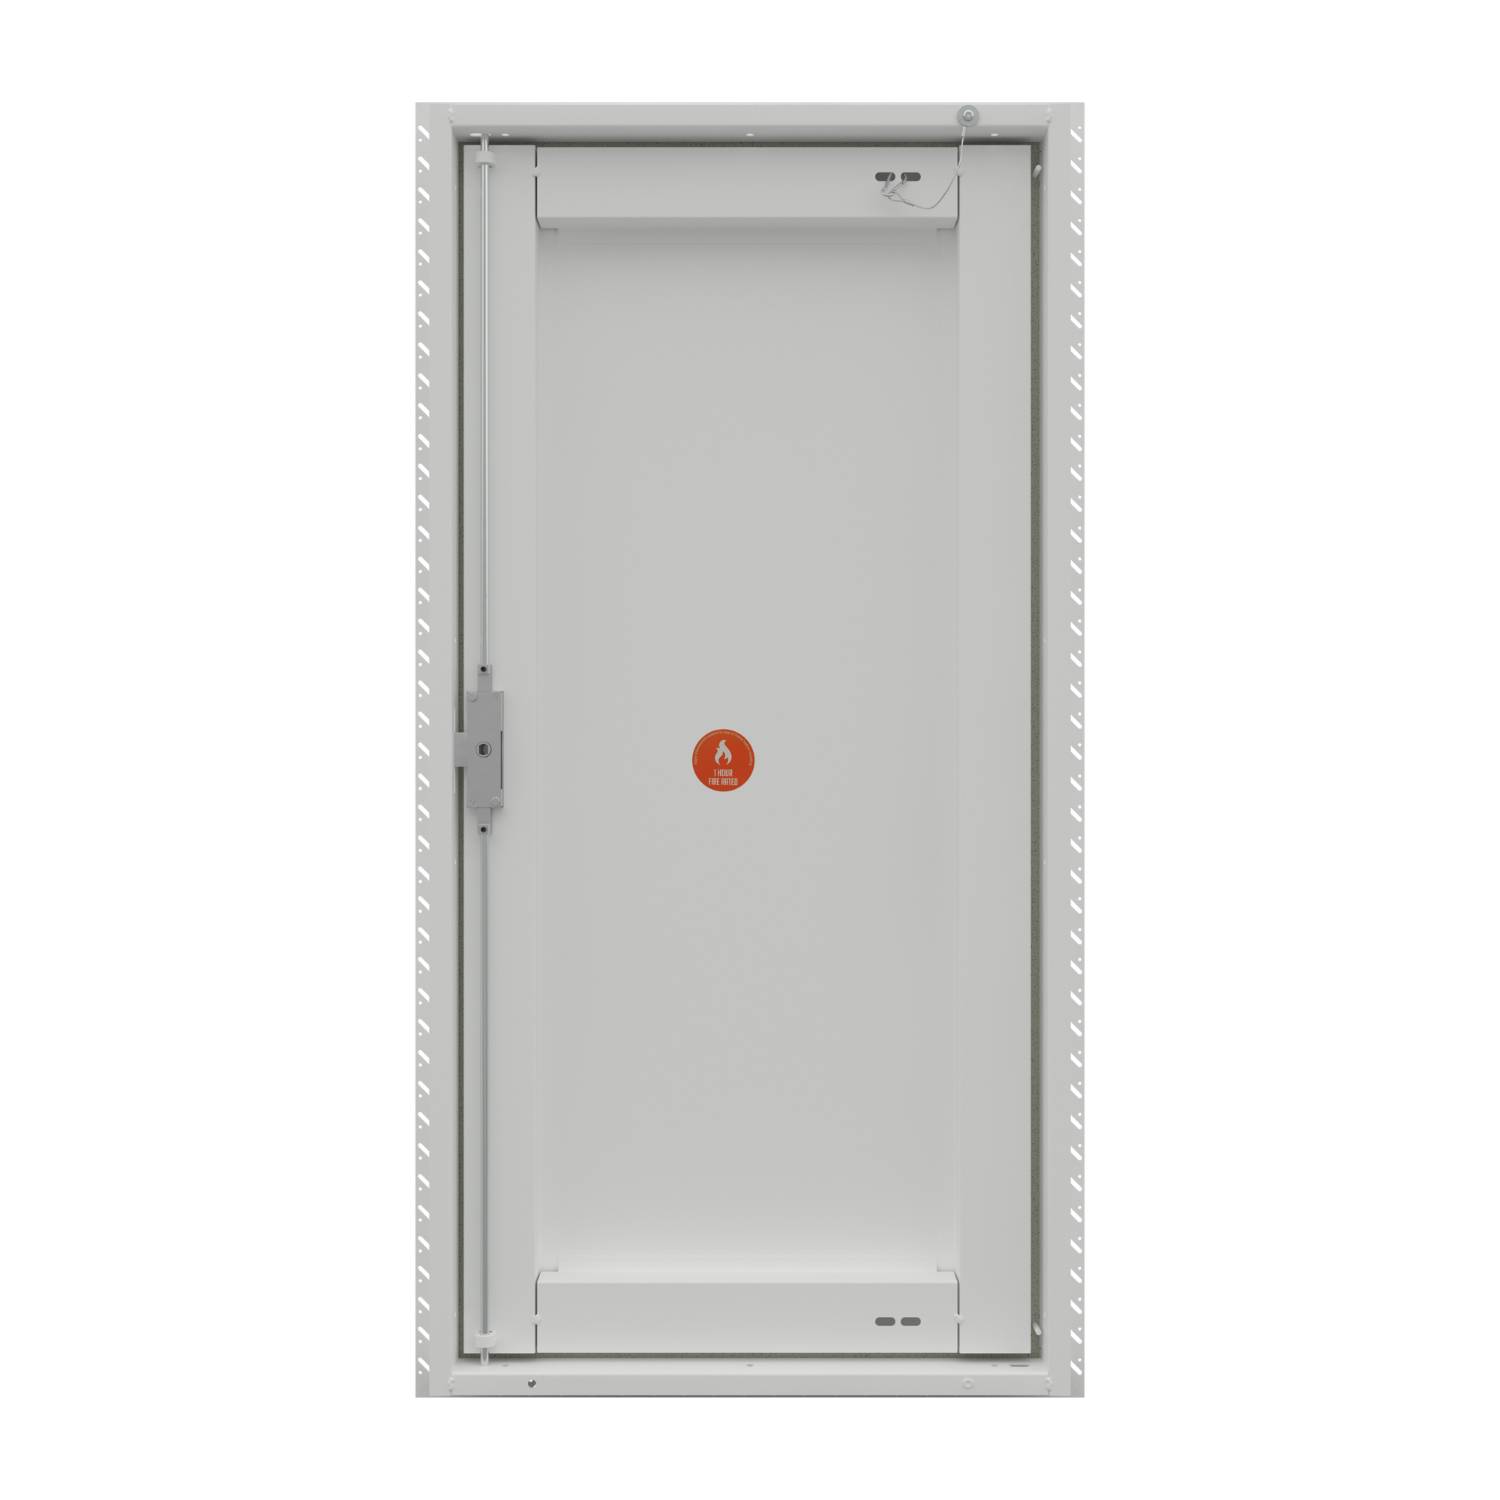 Access Panel Metal Wall Riser Door Picture Frame